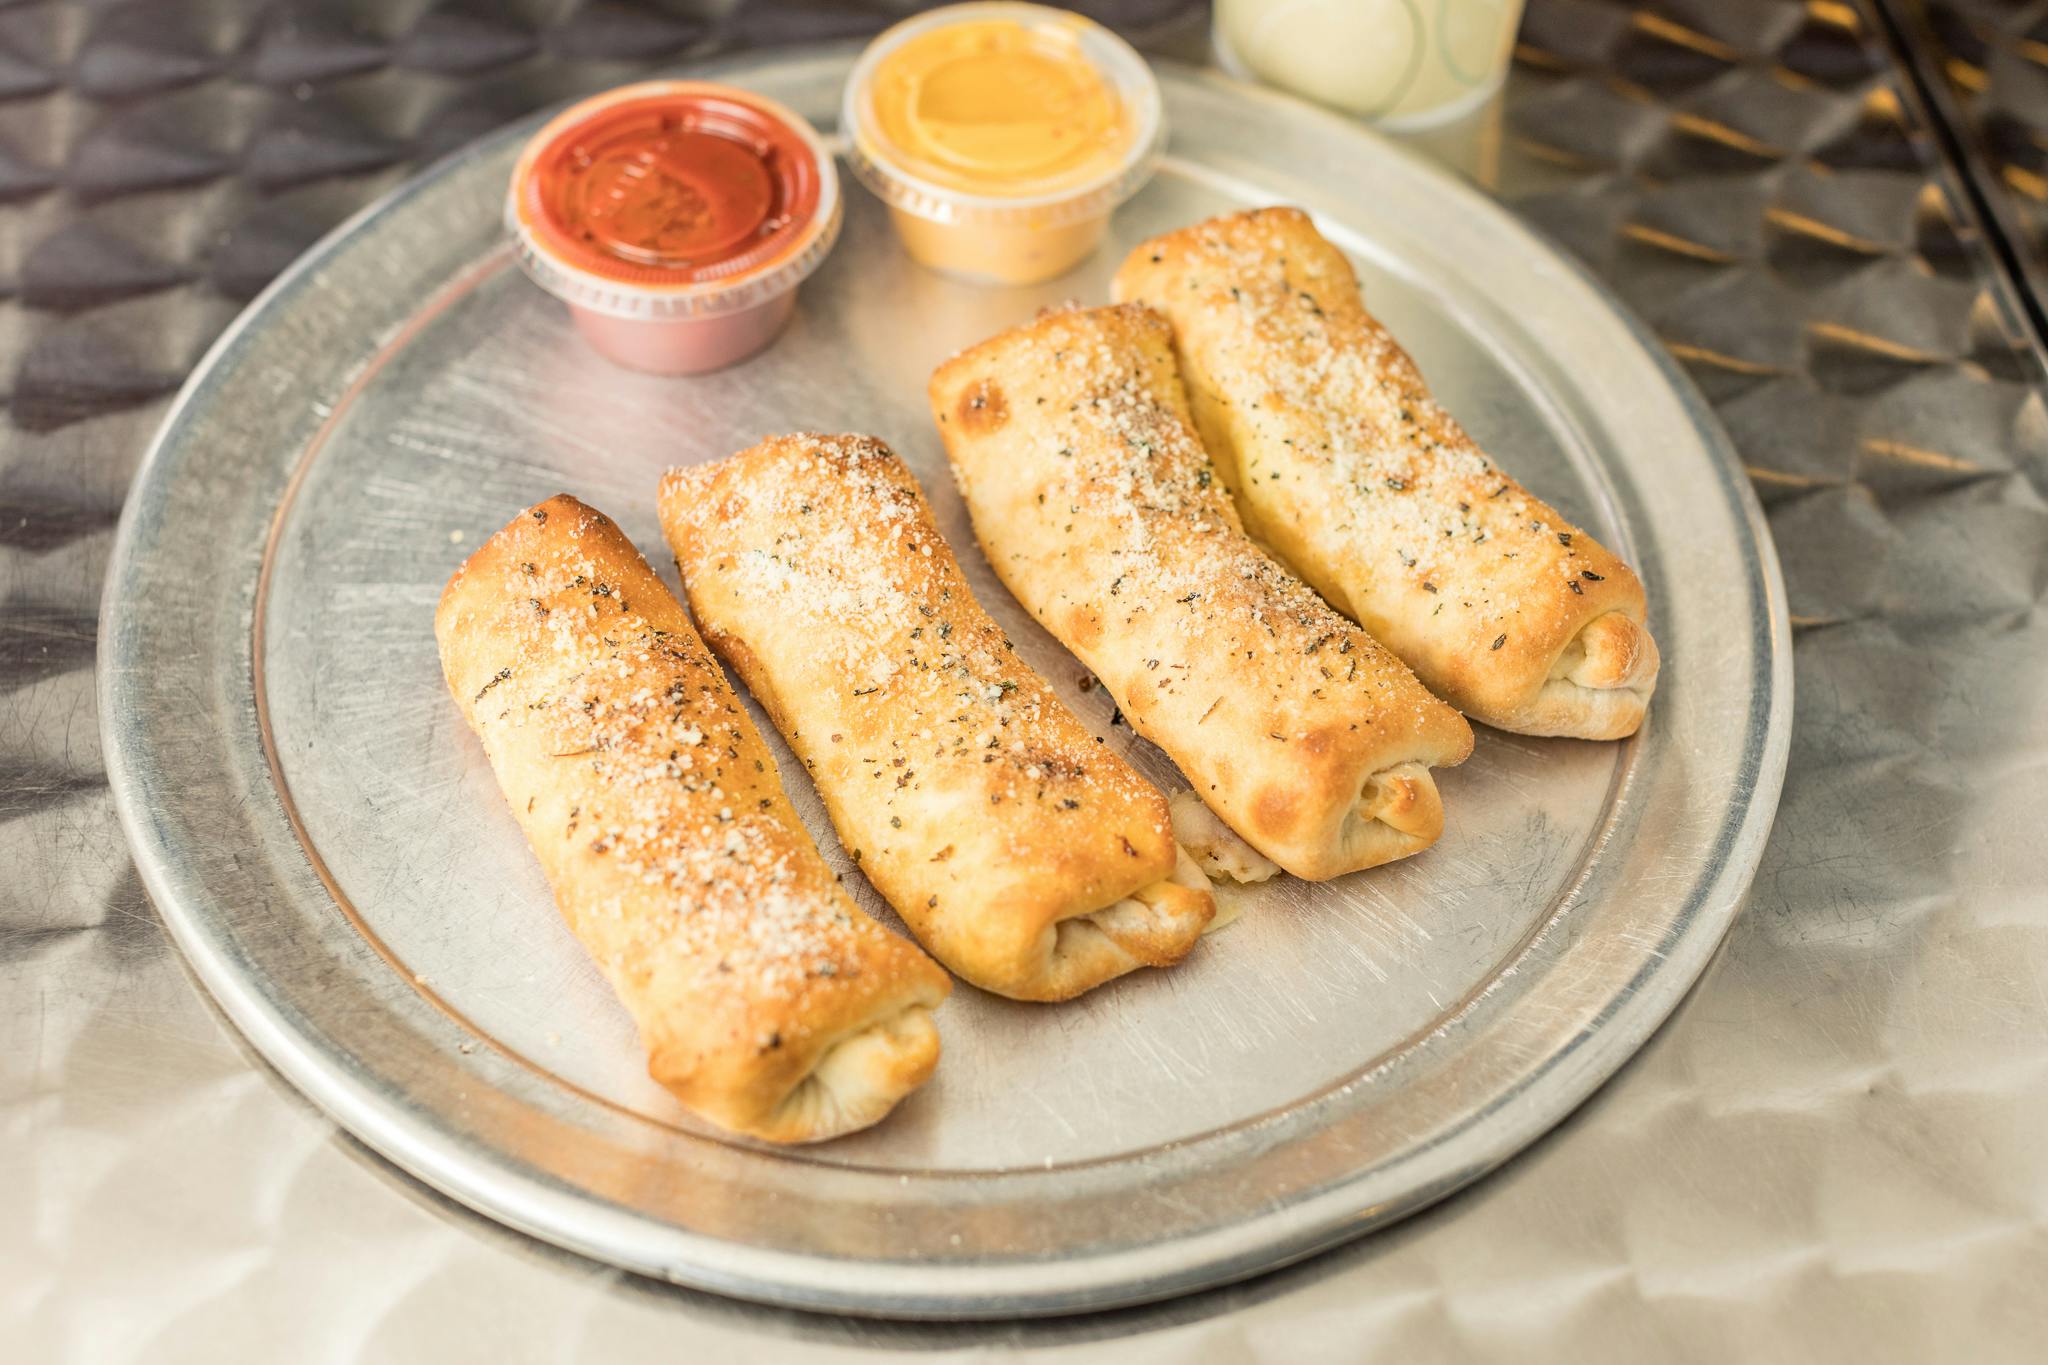 Manjare Rolls from Jim Bob's Pizza - Eau Claire in Eau Claire, WI